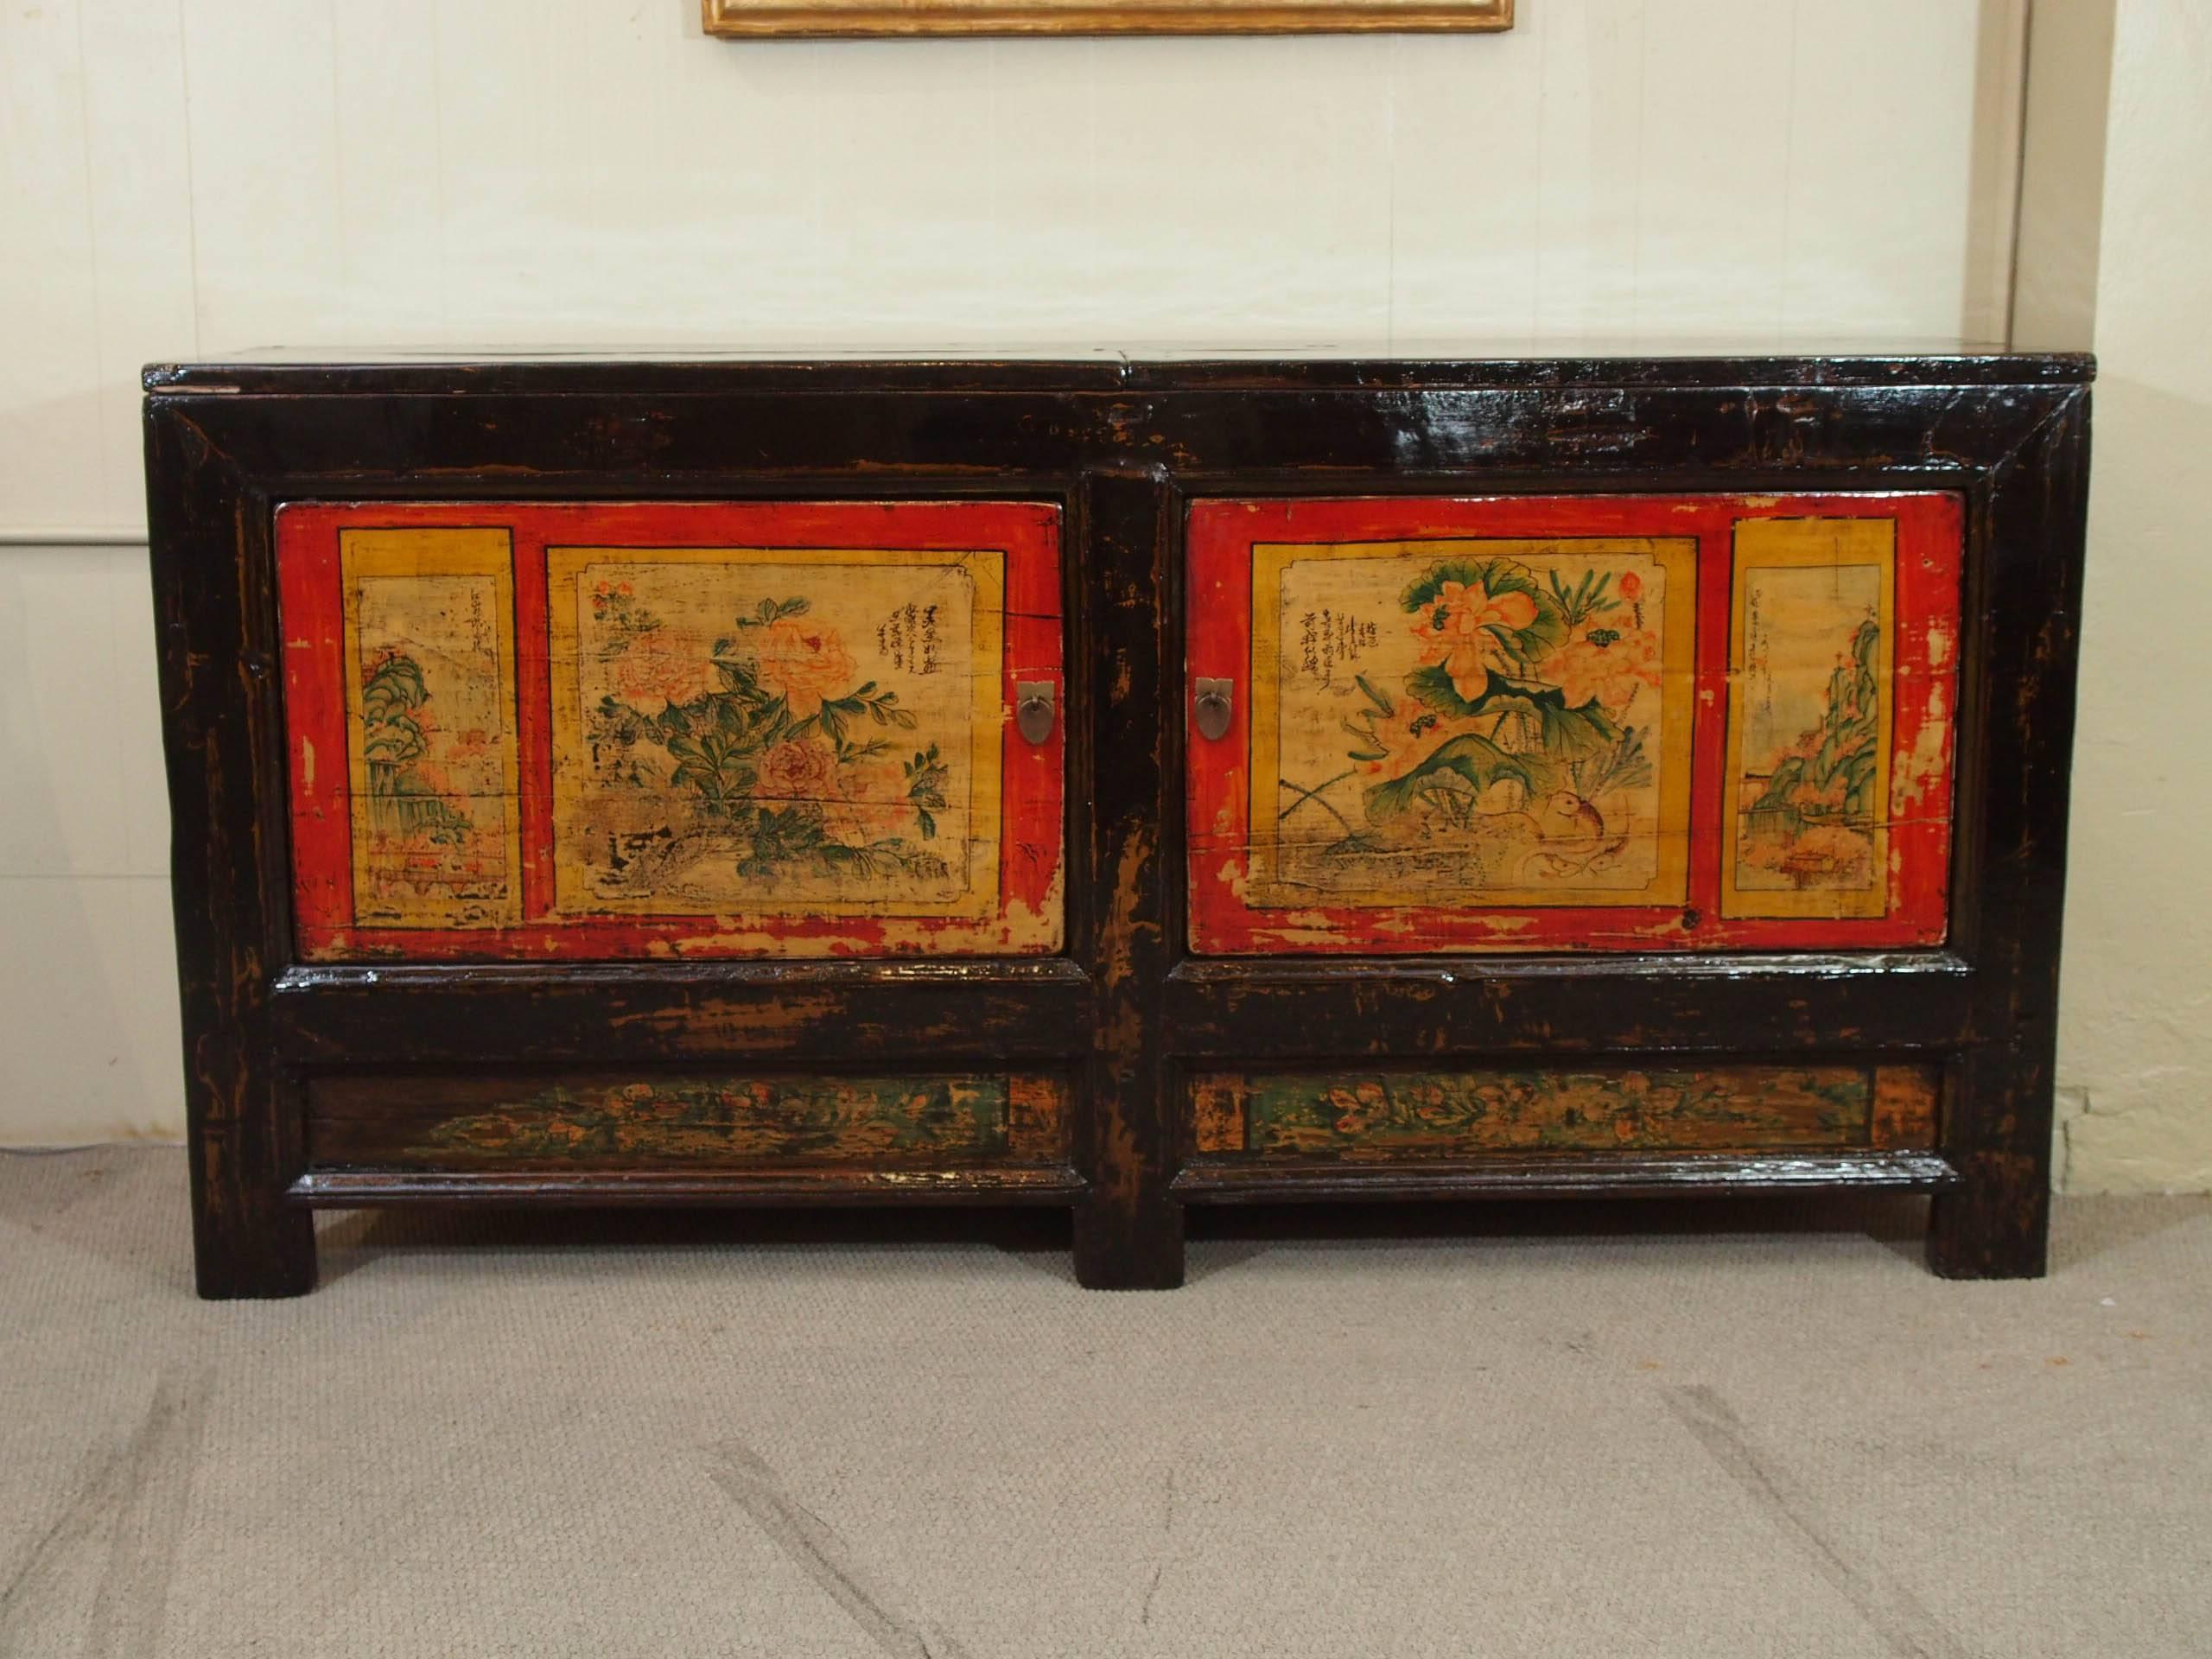 Antique Chinese black lacquer rice cabinet, circa 1915.